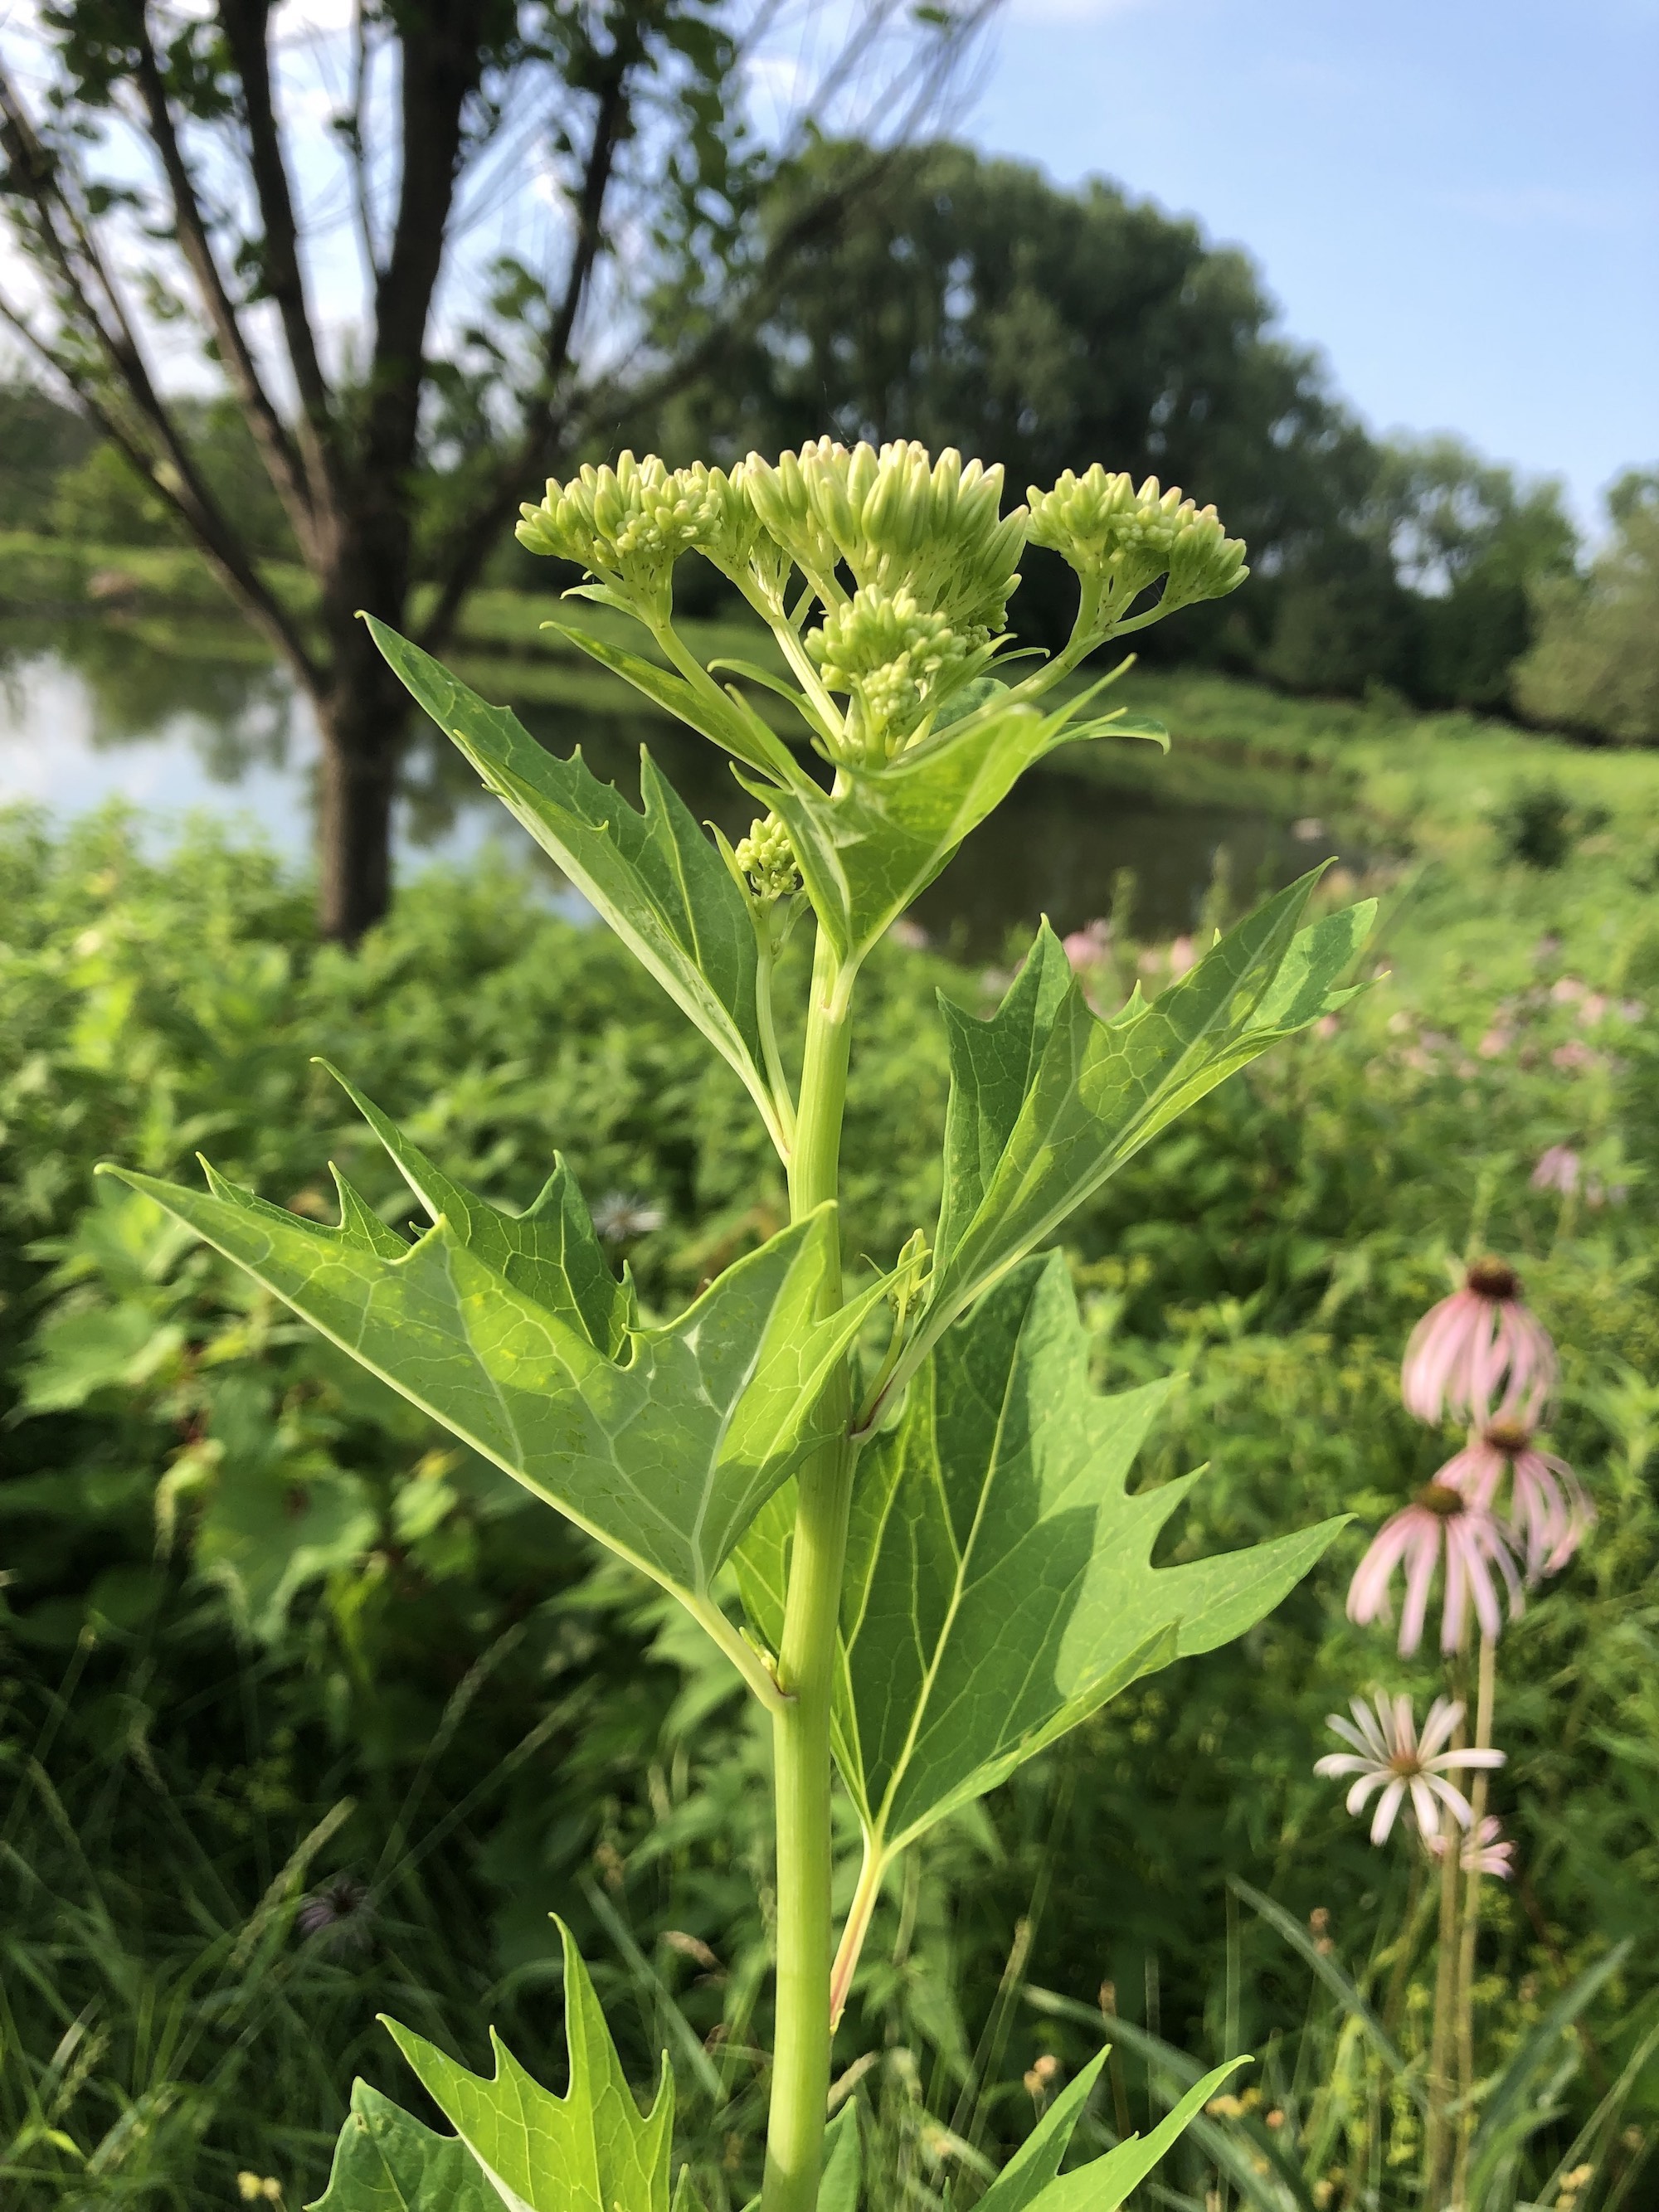 Pale Indian Plantain on bank of retaining pond on corner of Nakoma Road and Manitou Way in Madison, Wisconsin on July 3, 2019.